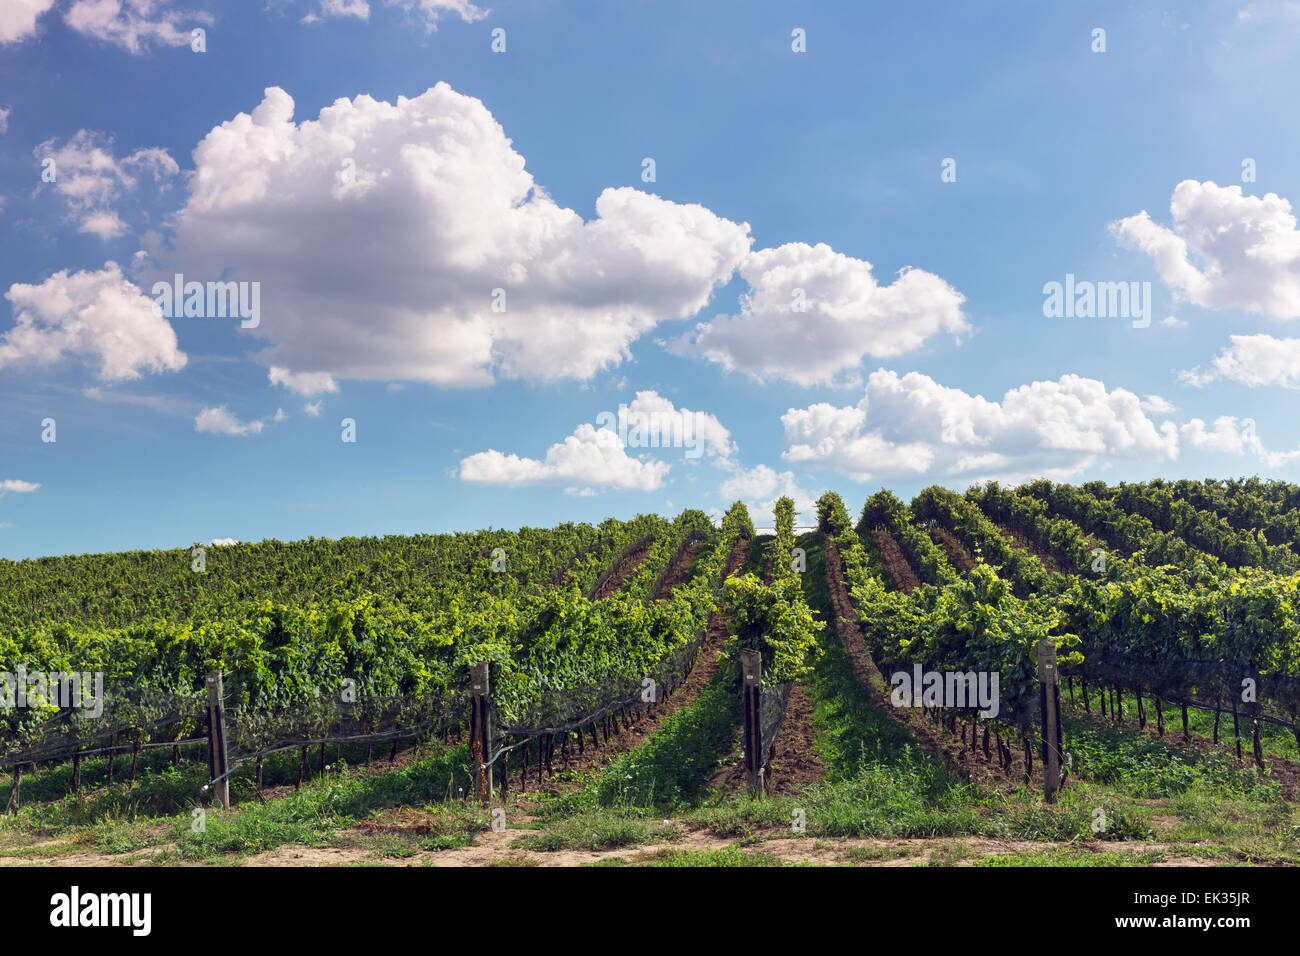 Canada, Ontario, Niagara-on-the Lake, vignobles au ravin Winery Banque D'Images